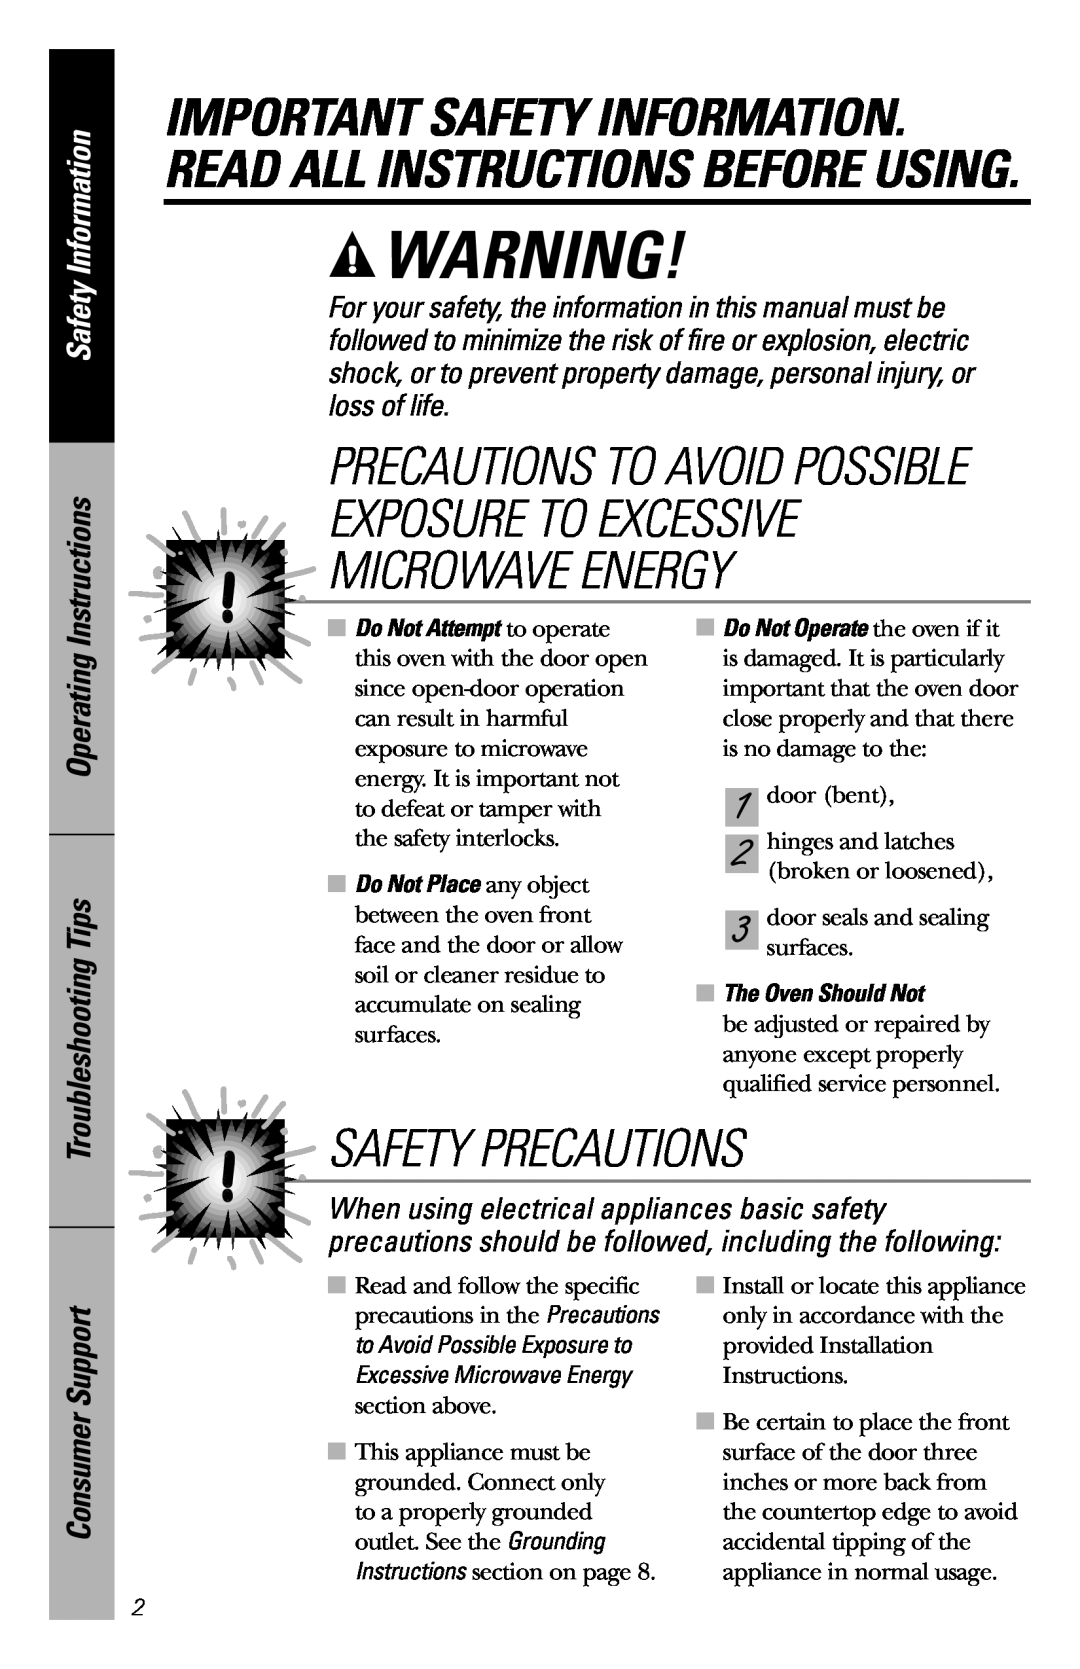 GE JES1034 Safety Precautions, Safety Information, Instructions, Operating Troubleshooting Tips, Consumer Support 